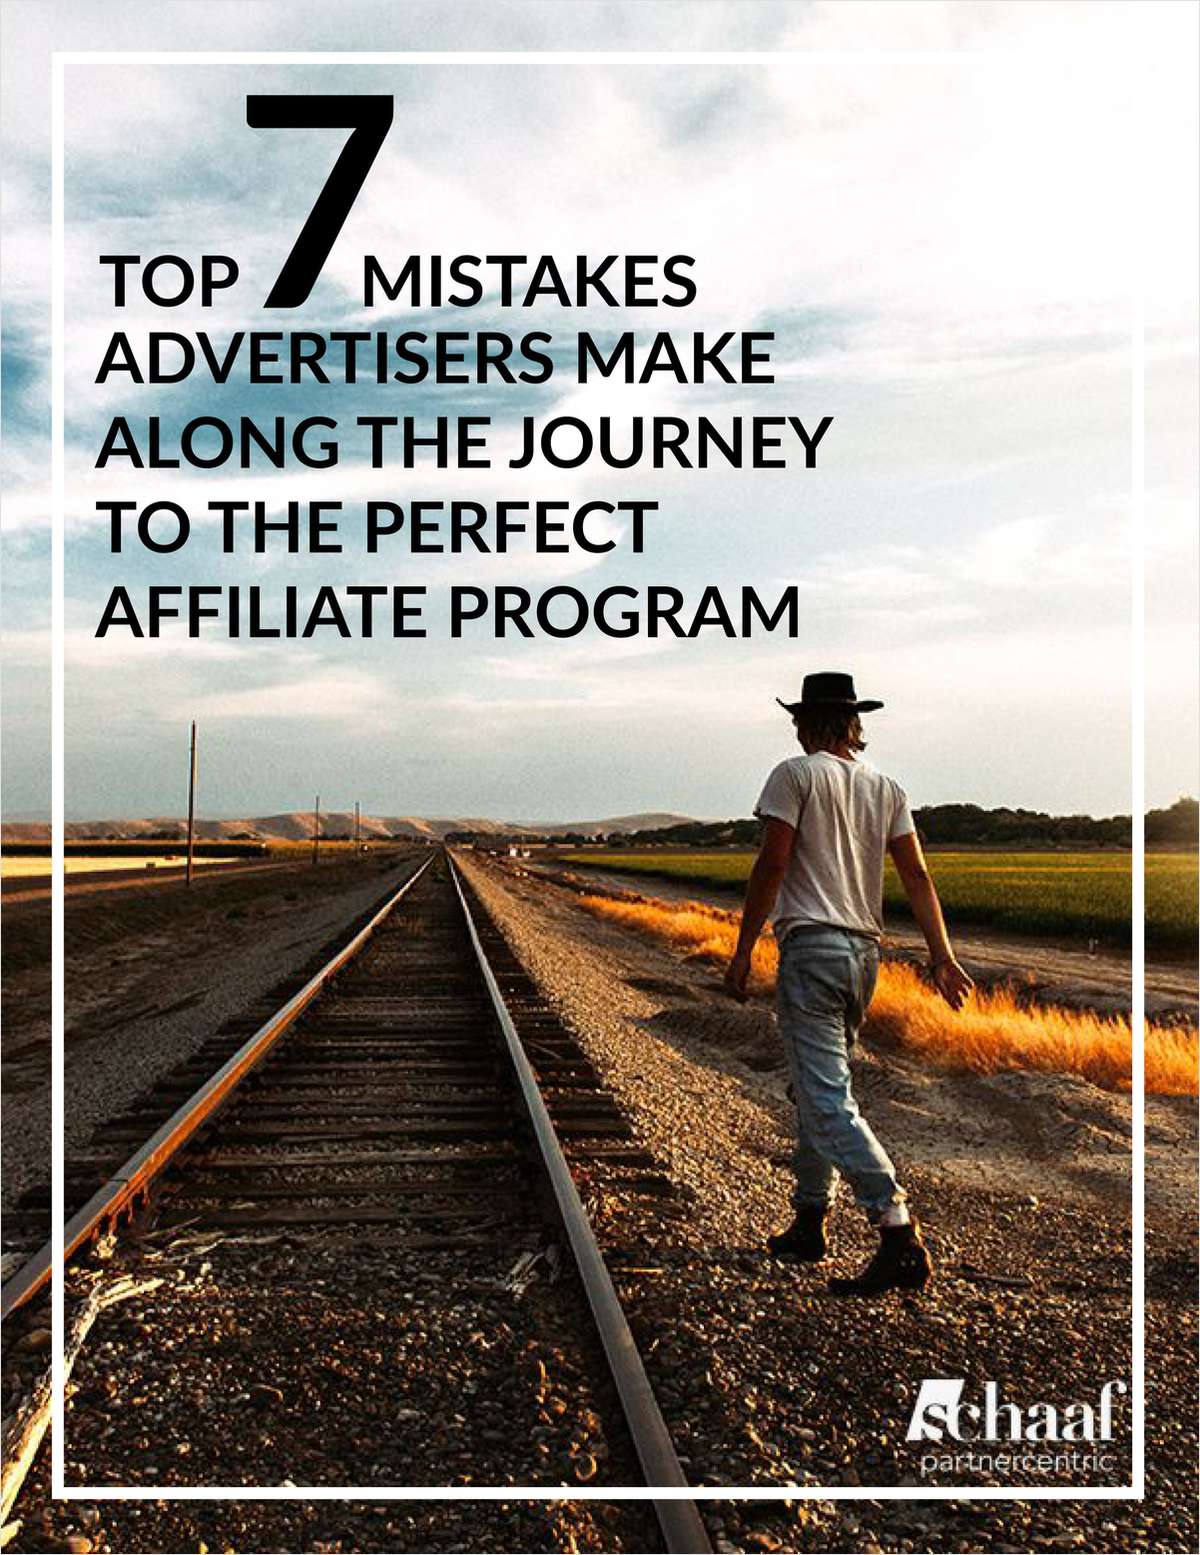 Top 7 Mistakes Advertisers Make Along the Journey to the Perfect Affiliate Program